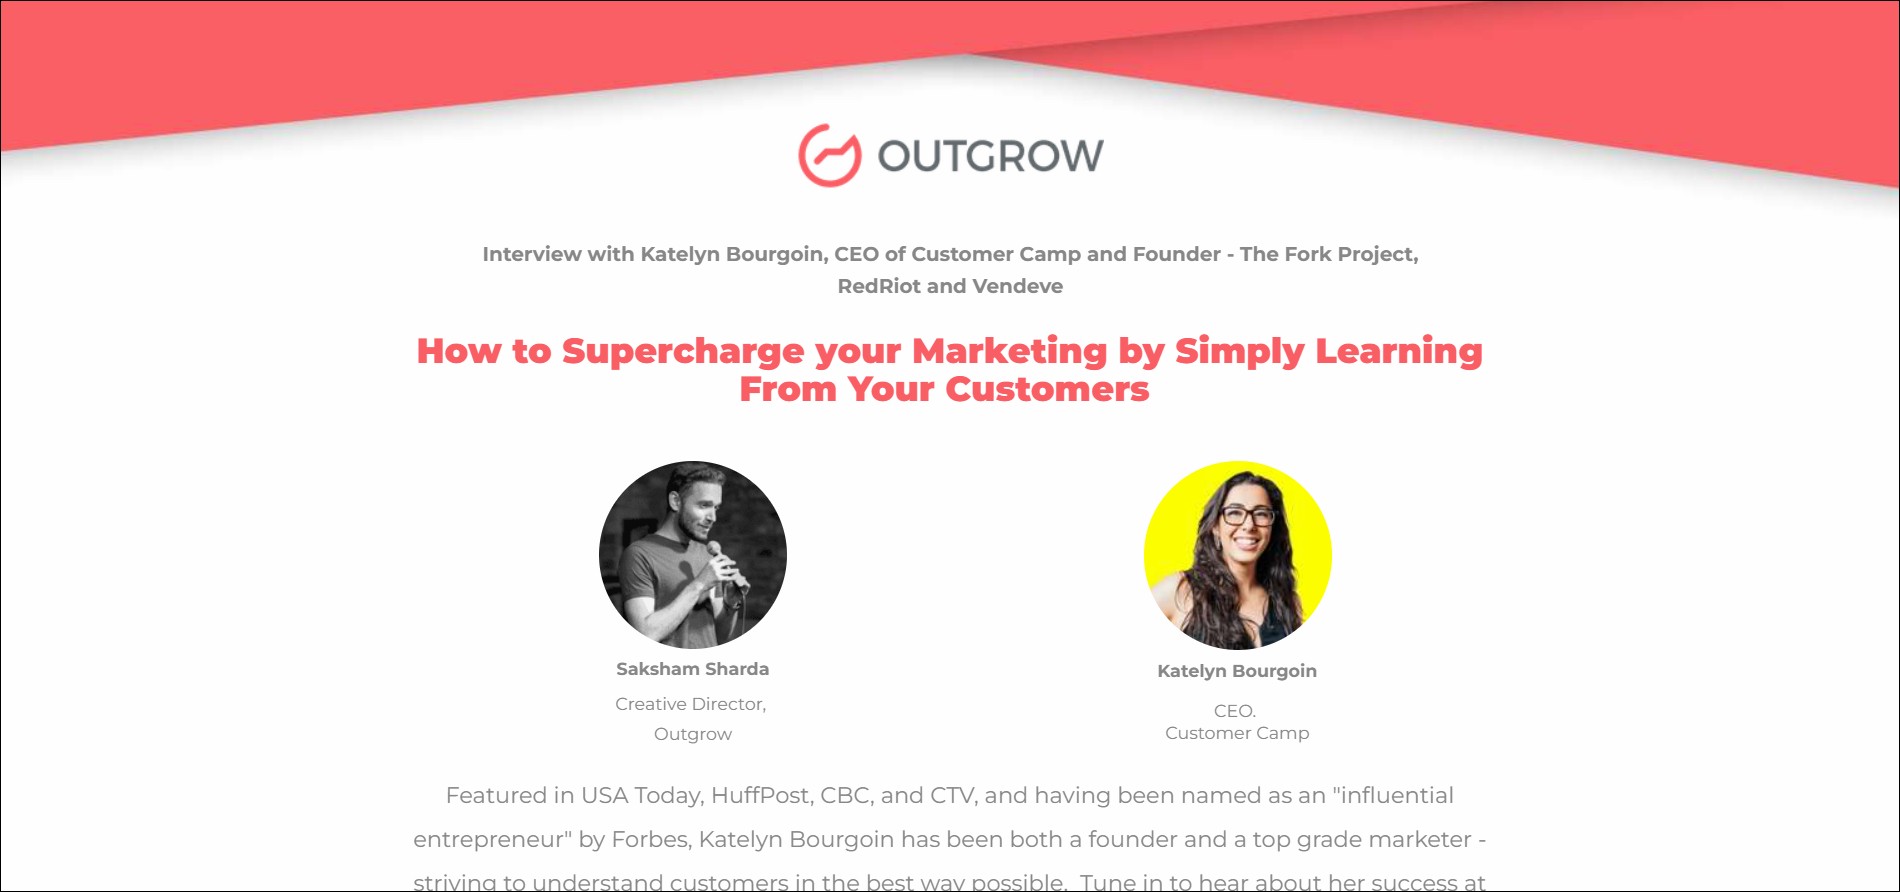 How to Supercharge Your Marketing by Simply Learning From Your Customers